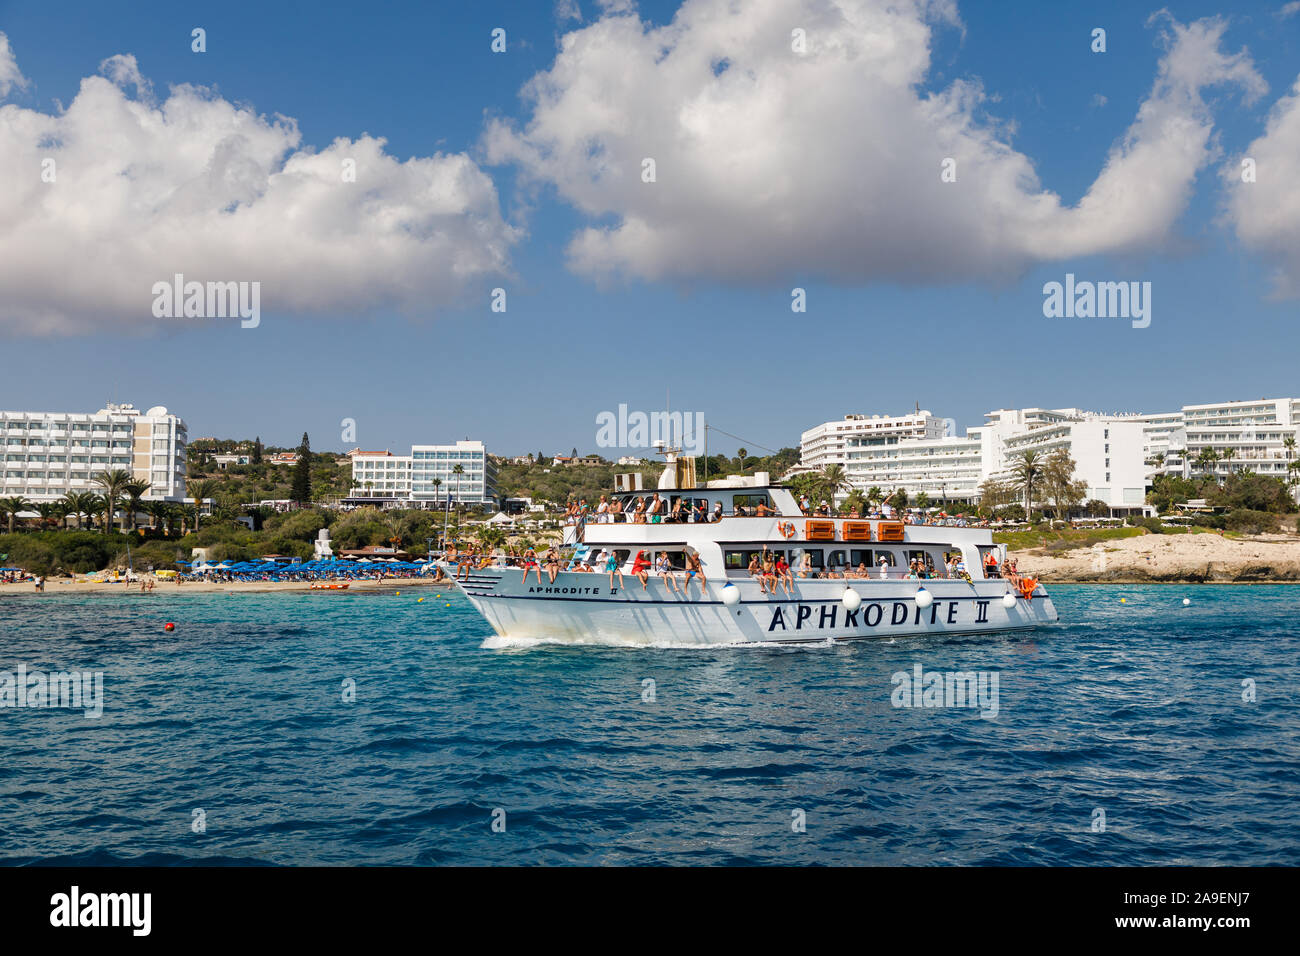 Ayia Napa, Cyprus - September 27 2019: Tourists are traveling on a pleasure boat along the coast Stock Photo